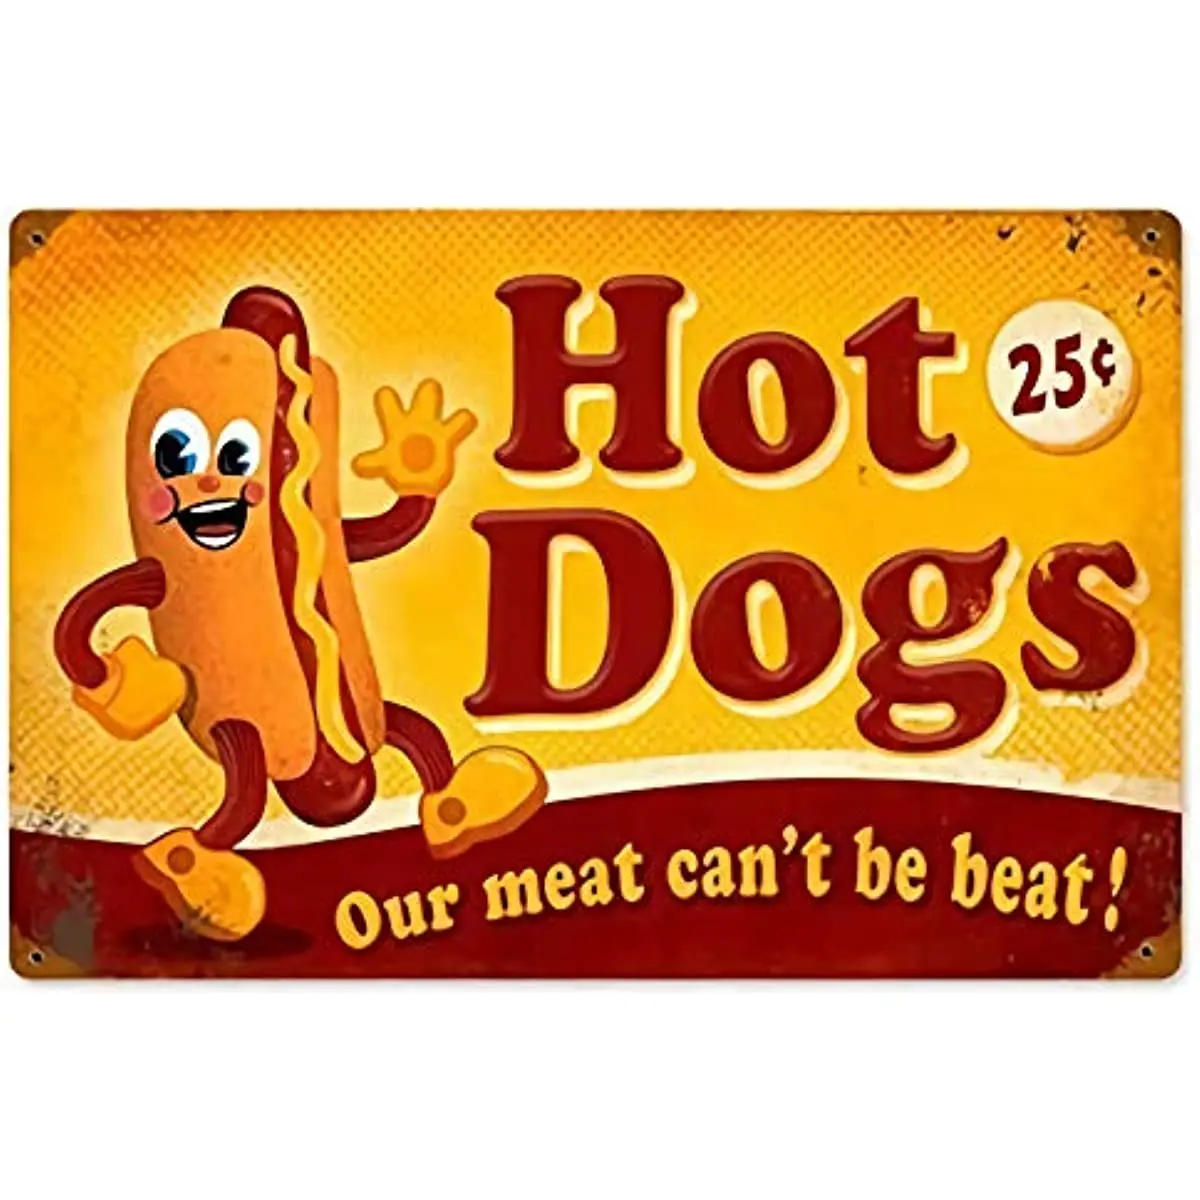 

New Metal Poster Hot Dogs Our Meat Can't Be Beat Vintage Metal Tin Sign 8x12 Inch Retro Art Home Fast Food Bar Garage Wall Decor